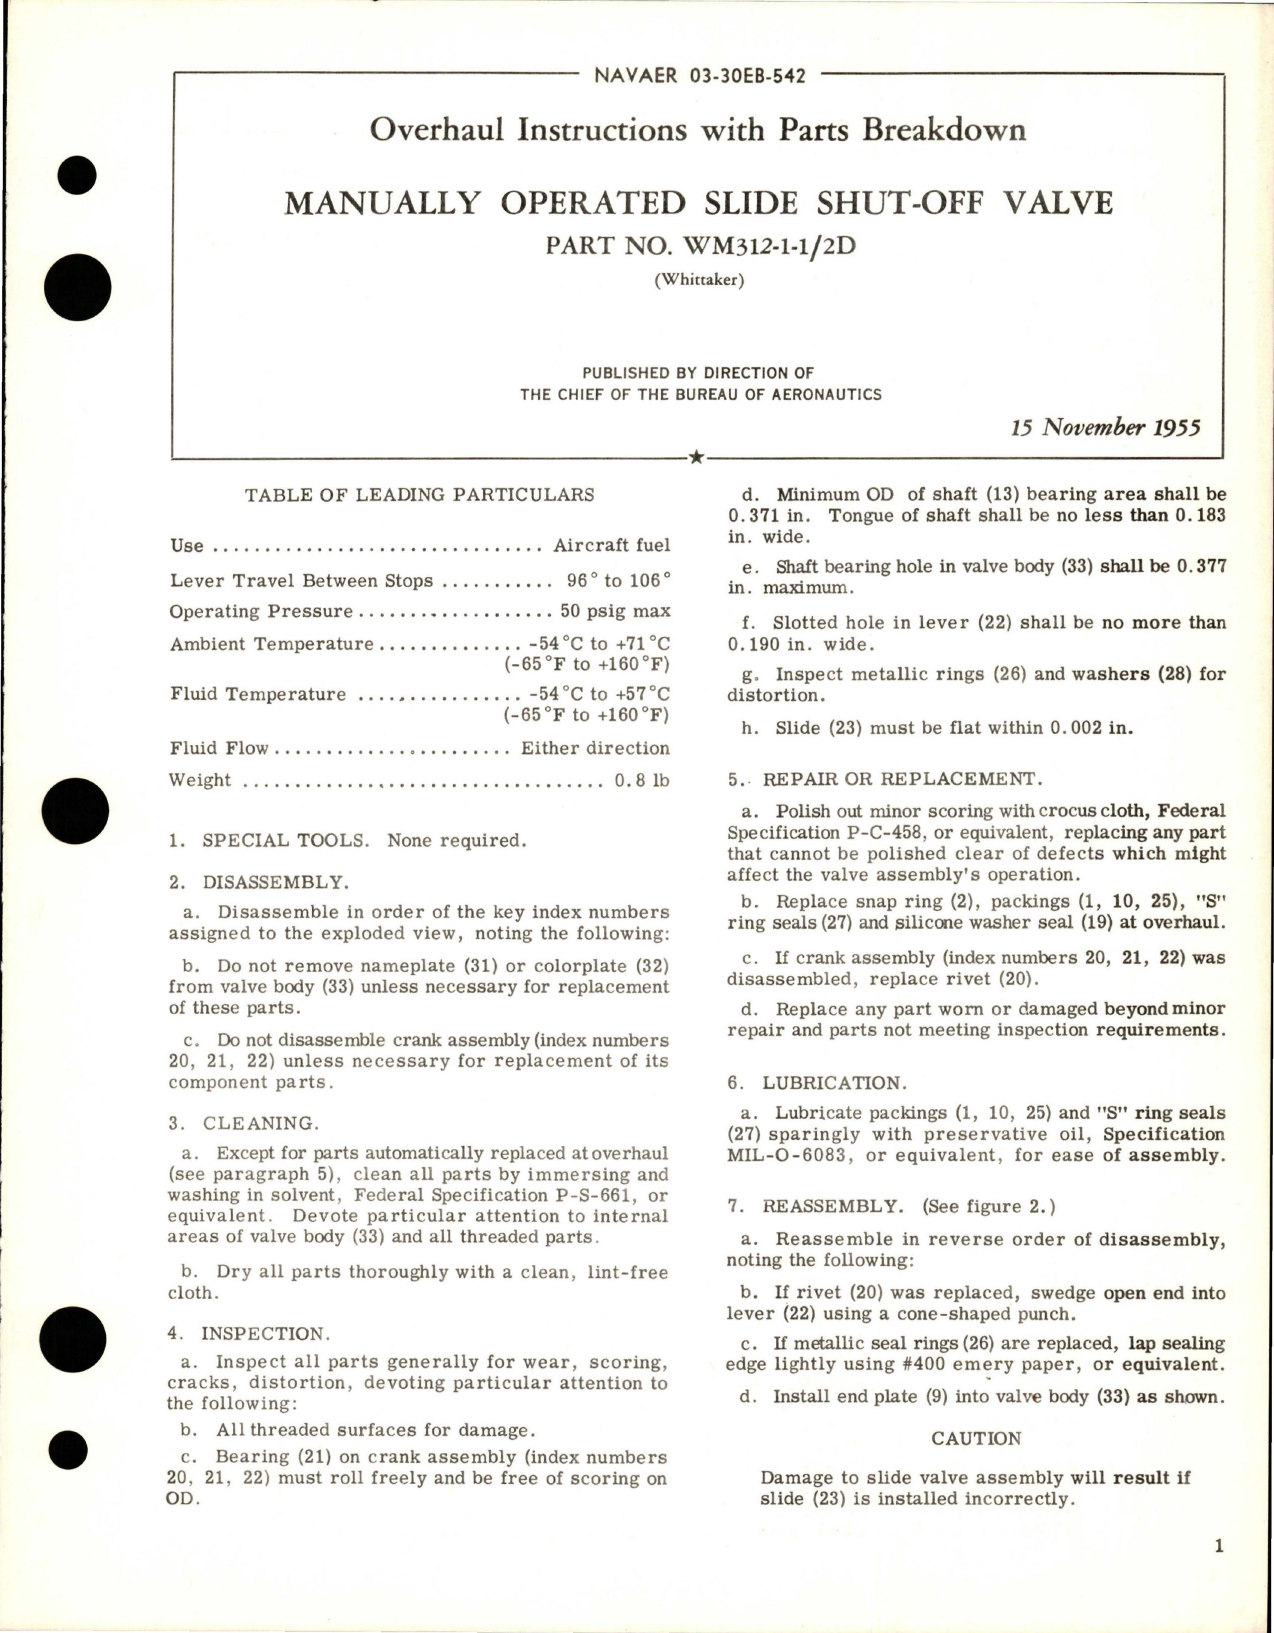 Sample page 1 from AirCorps Library document: Overhaul Instructions with Parts for Manually Operated Slide Shut Off Valve - Part WM312-1-1/2D